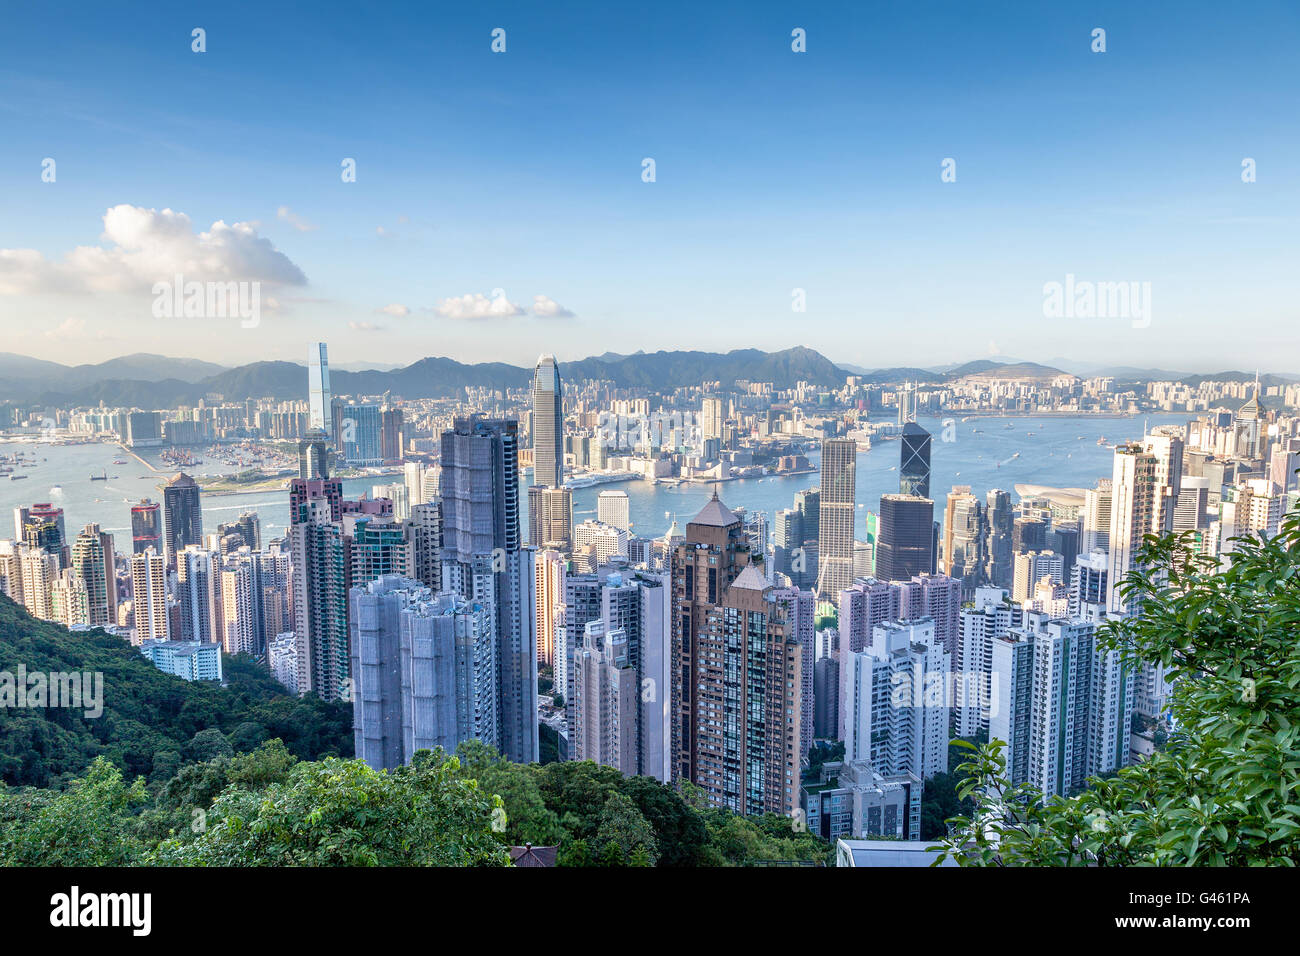 Aerial shot of Victoria Harbor as viewed atop Victoria Peak. This is Hong Kong's famous financial downtown district. Stock Photo